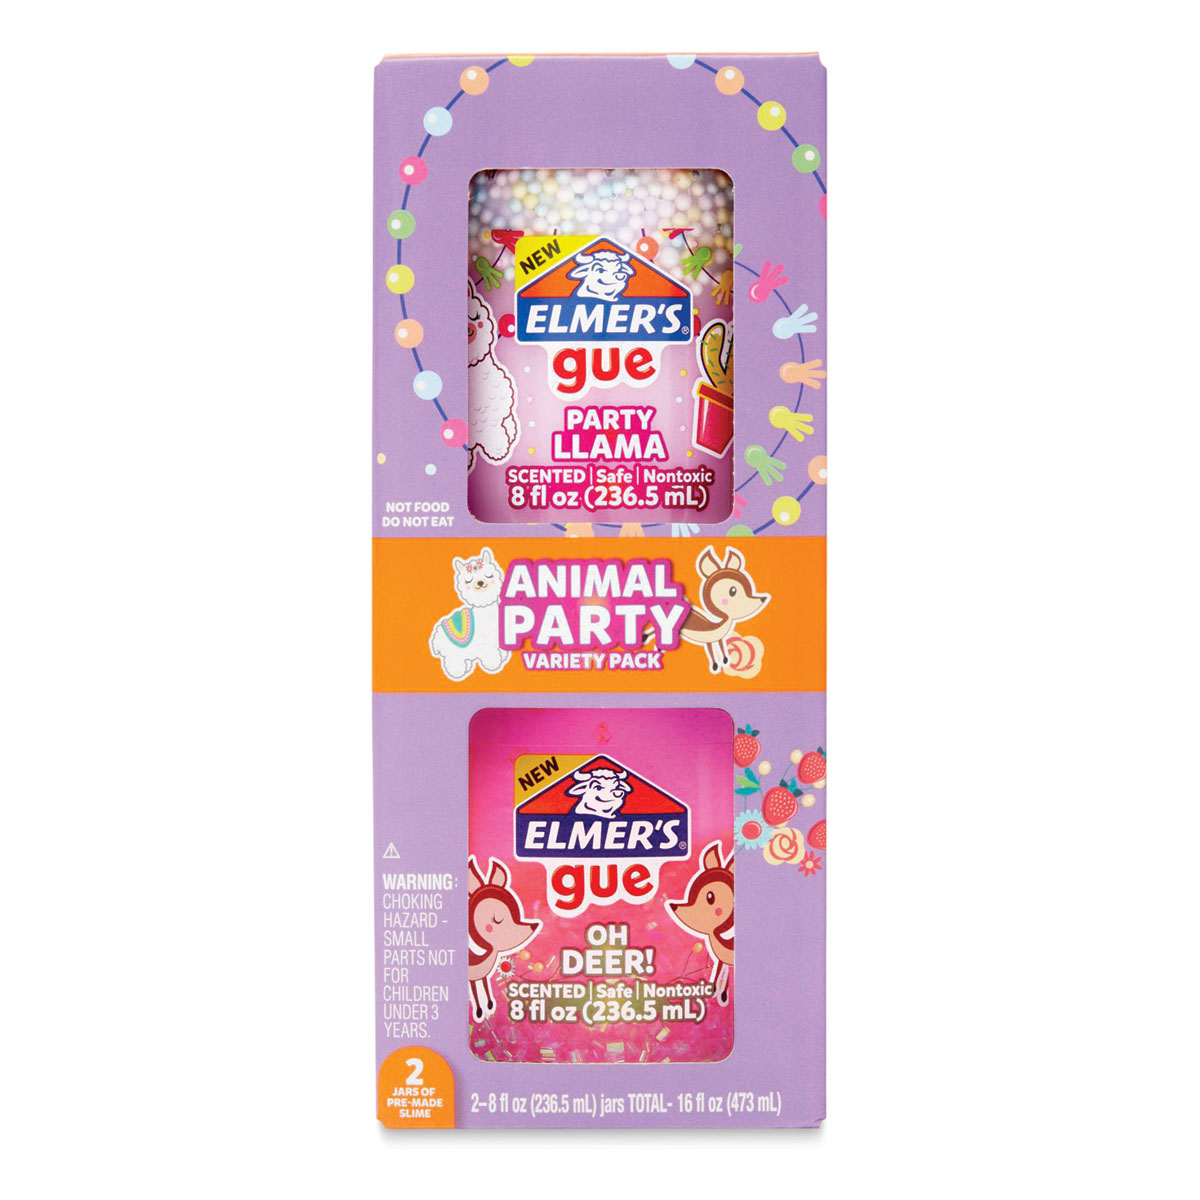 Elmer's Gue Premade Slime - Animal Party Pack, 8 oz